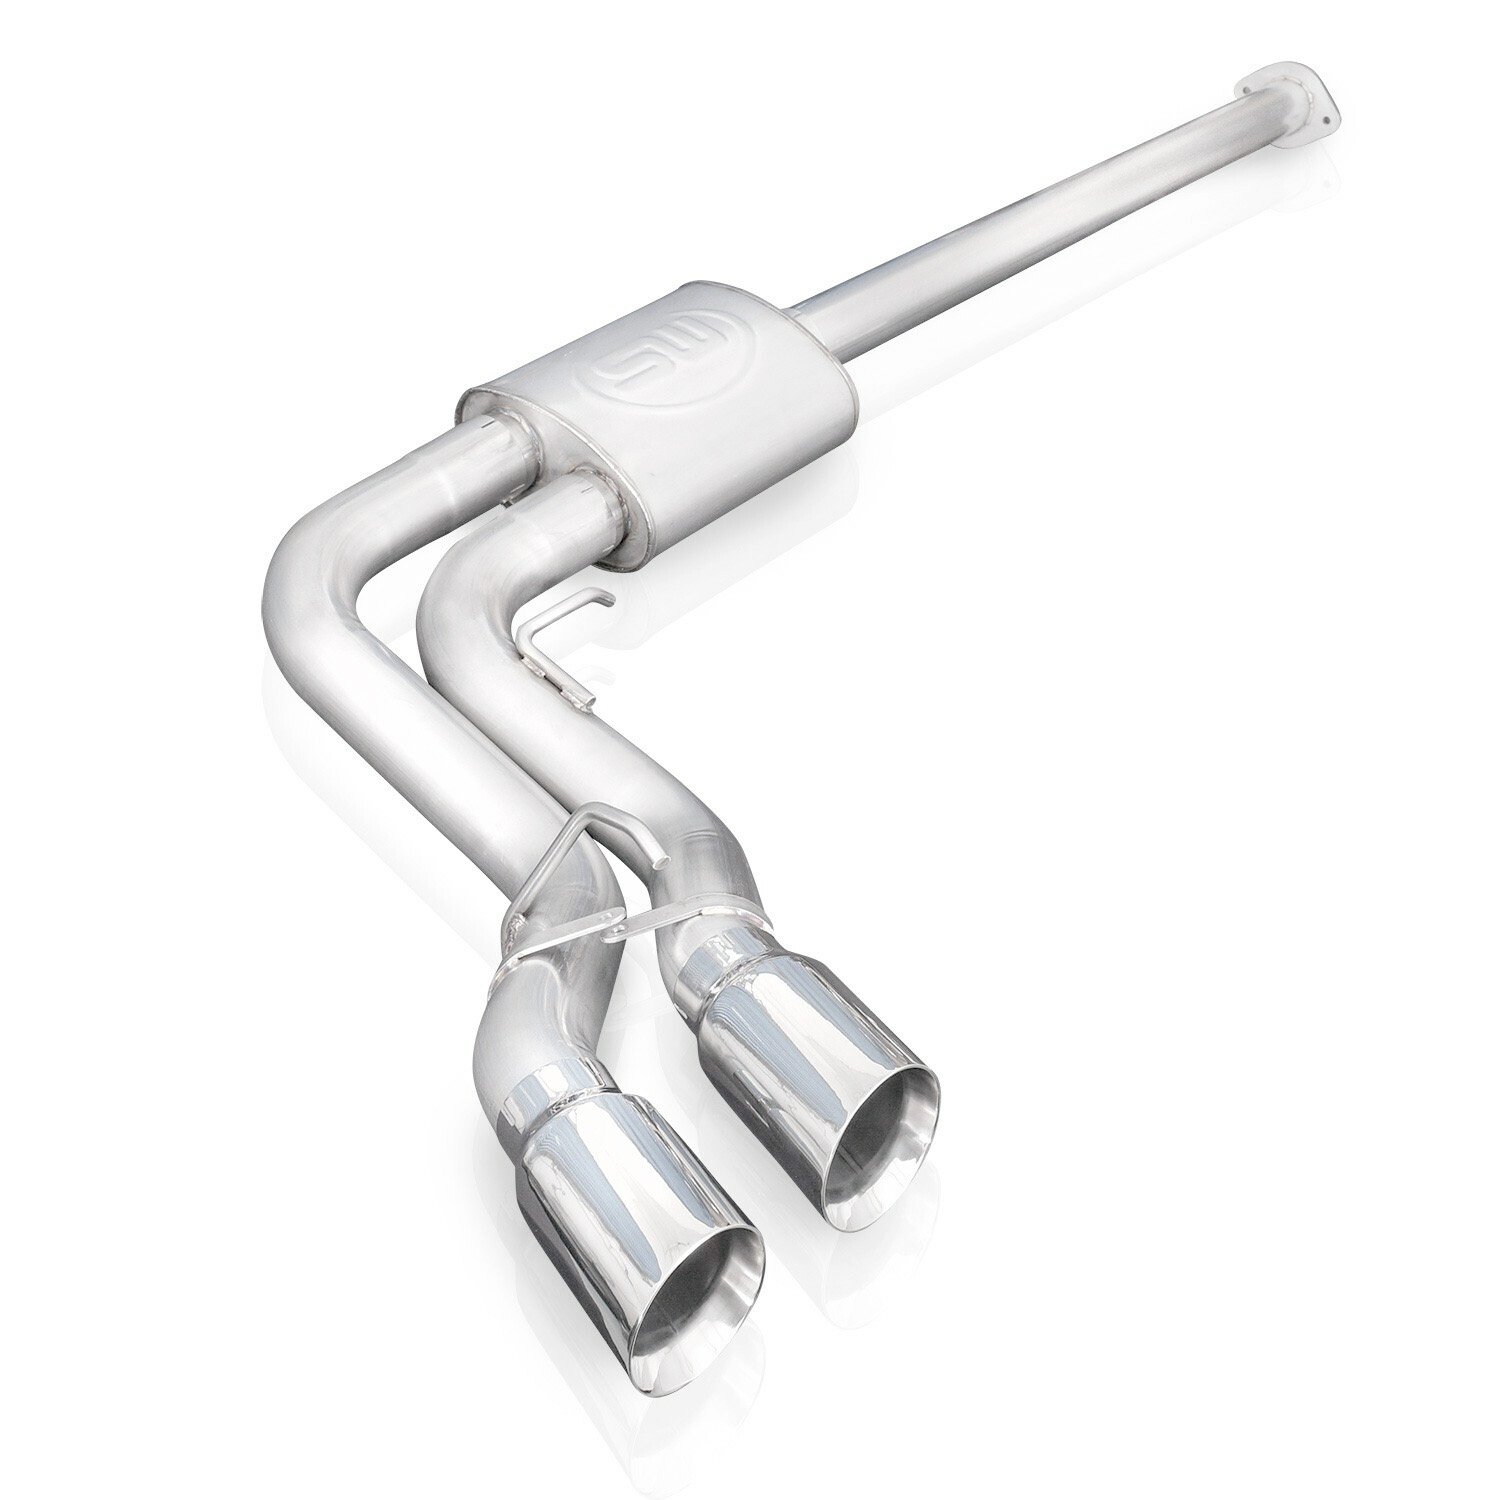 Cat-Back Exhaust System for Late-Model Ford F-150 5L V8 - Lightning Style - Passenger Side in Front of Tire Exit